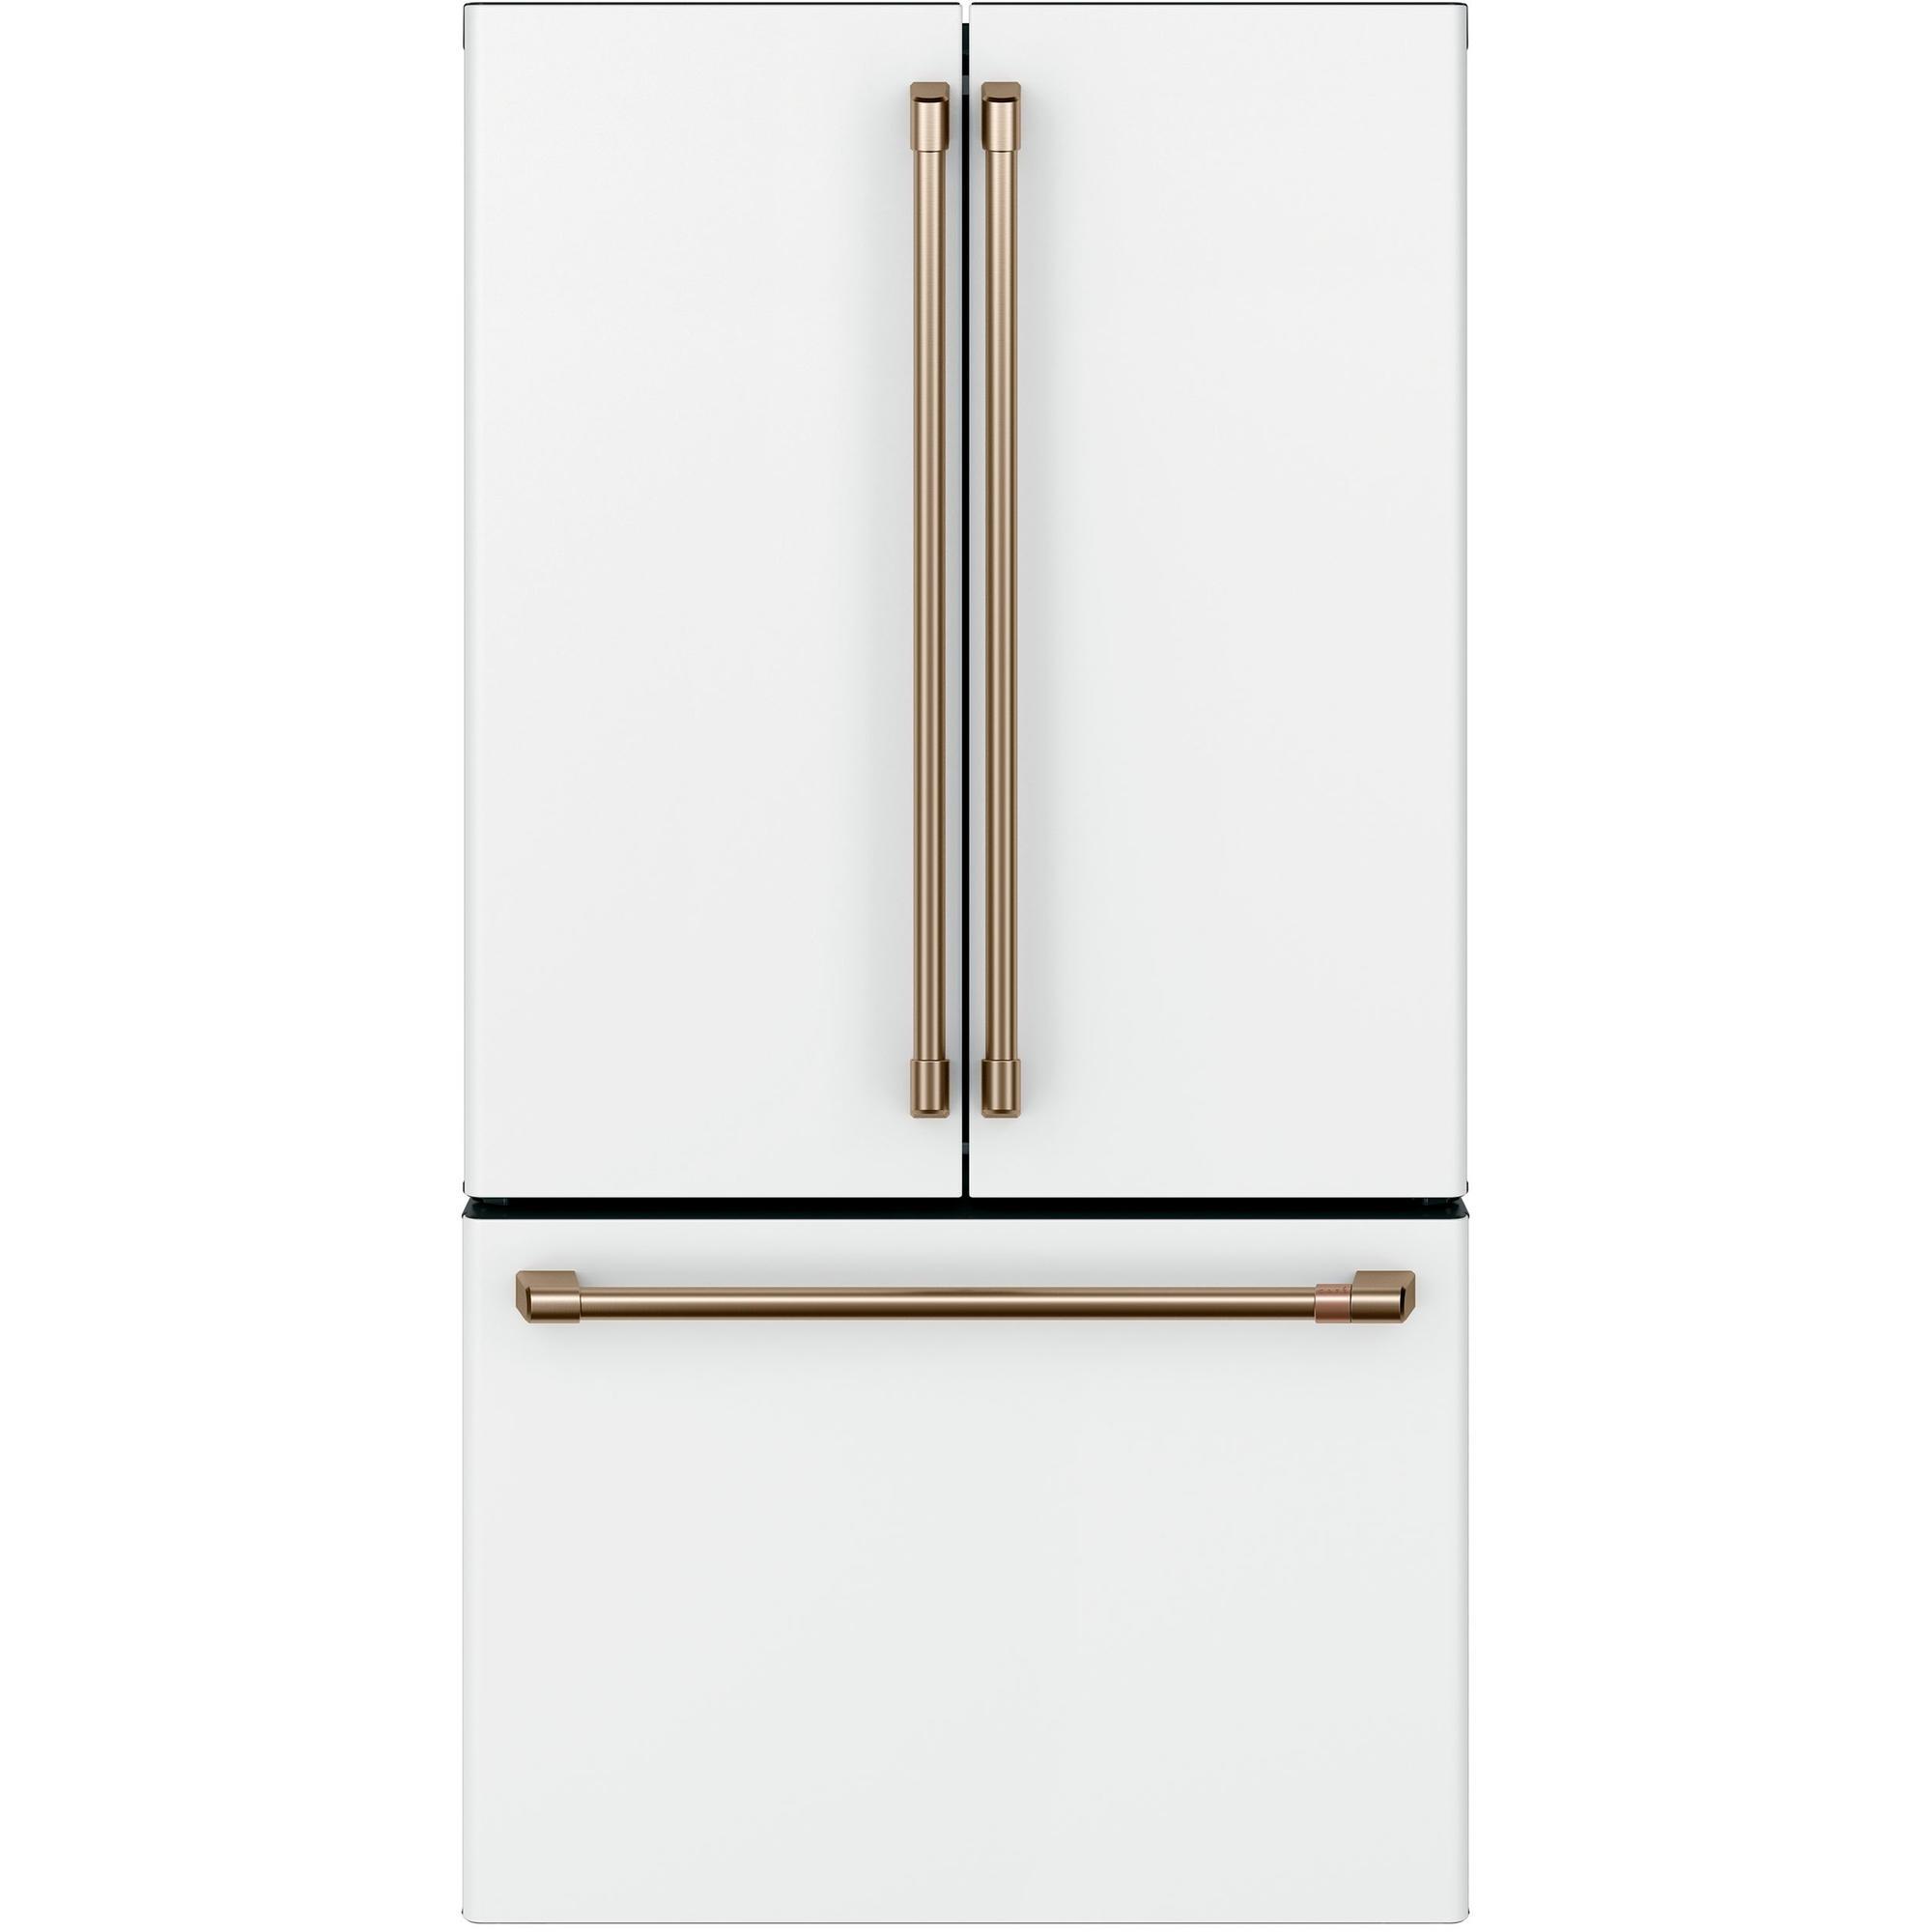 Cafe Café CWE23SP4MW2 23.1 Cu. Ft. Counter-Depth French-Door Refrigerator in Matte White